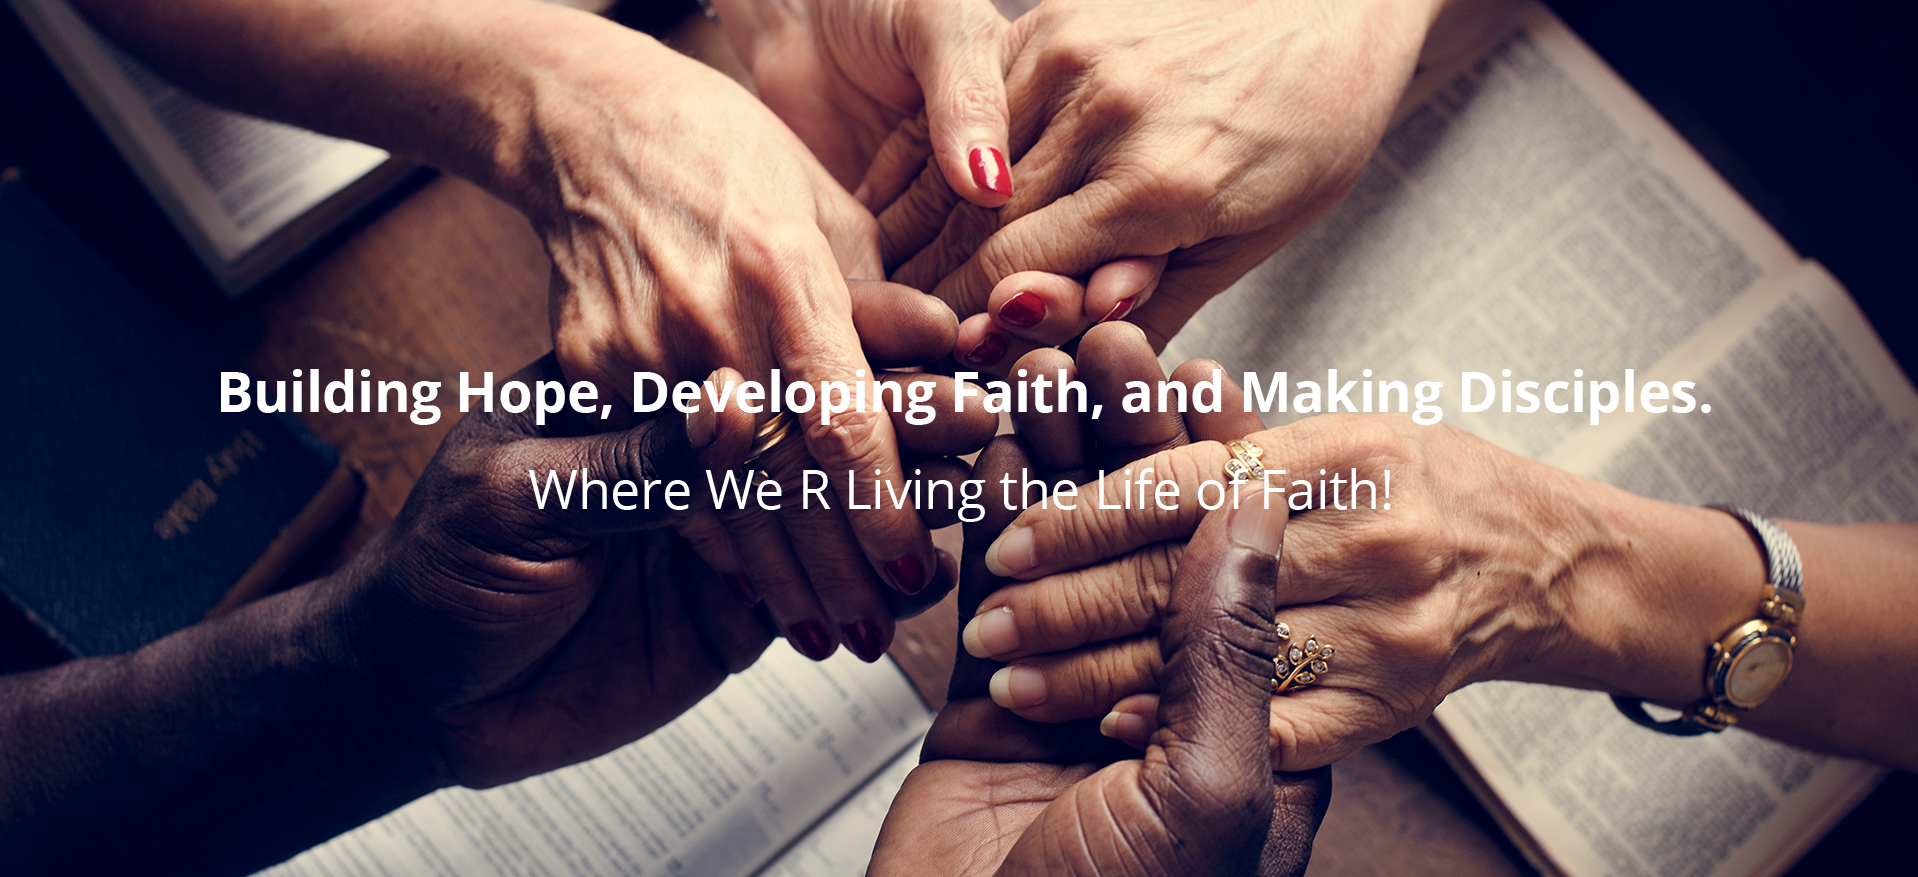 Building Hope, Developing Faith, and Making Disciples.